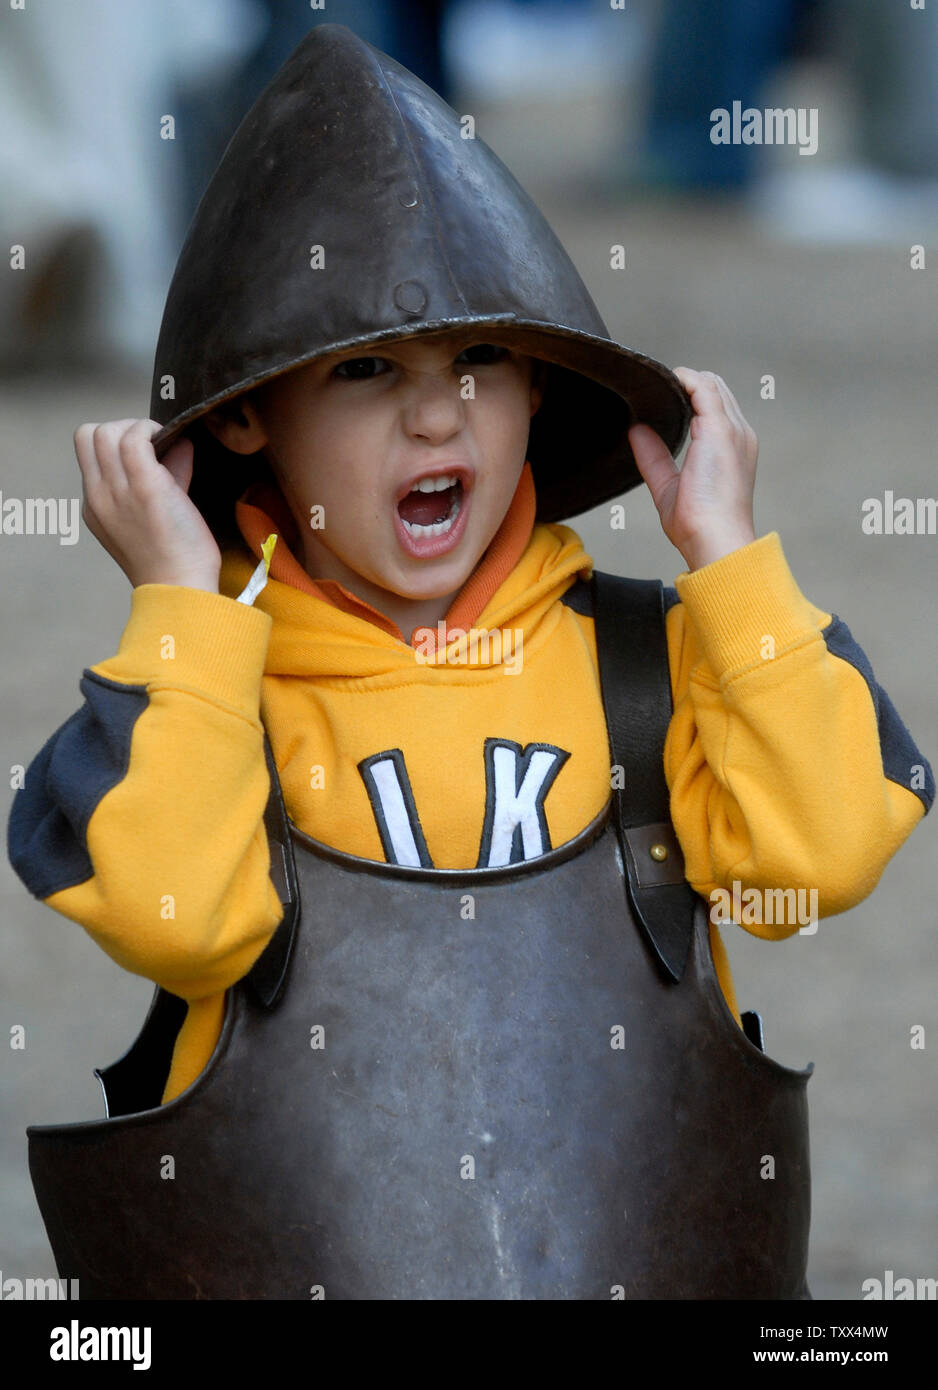 Nick Roadarmel, 3, of Gainesville, Virginia tries on colonial armor during a weapons demonstration on the 400th anniversary weekend, in Jamestown, Virginia on May 13, 2007. (UPI Photo/Kevin Dietsch) Stock Photo